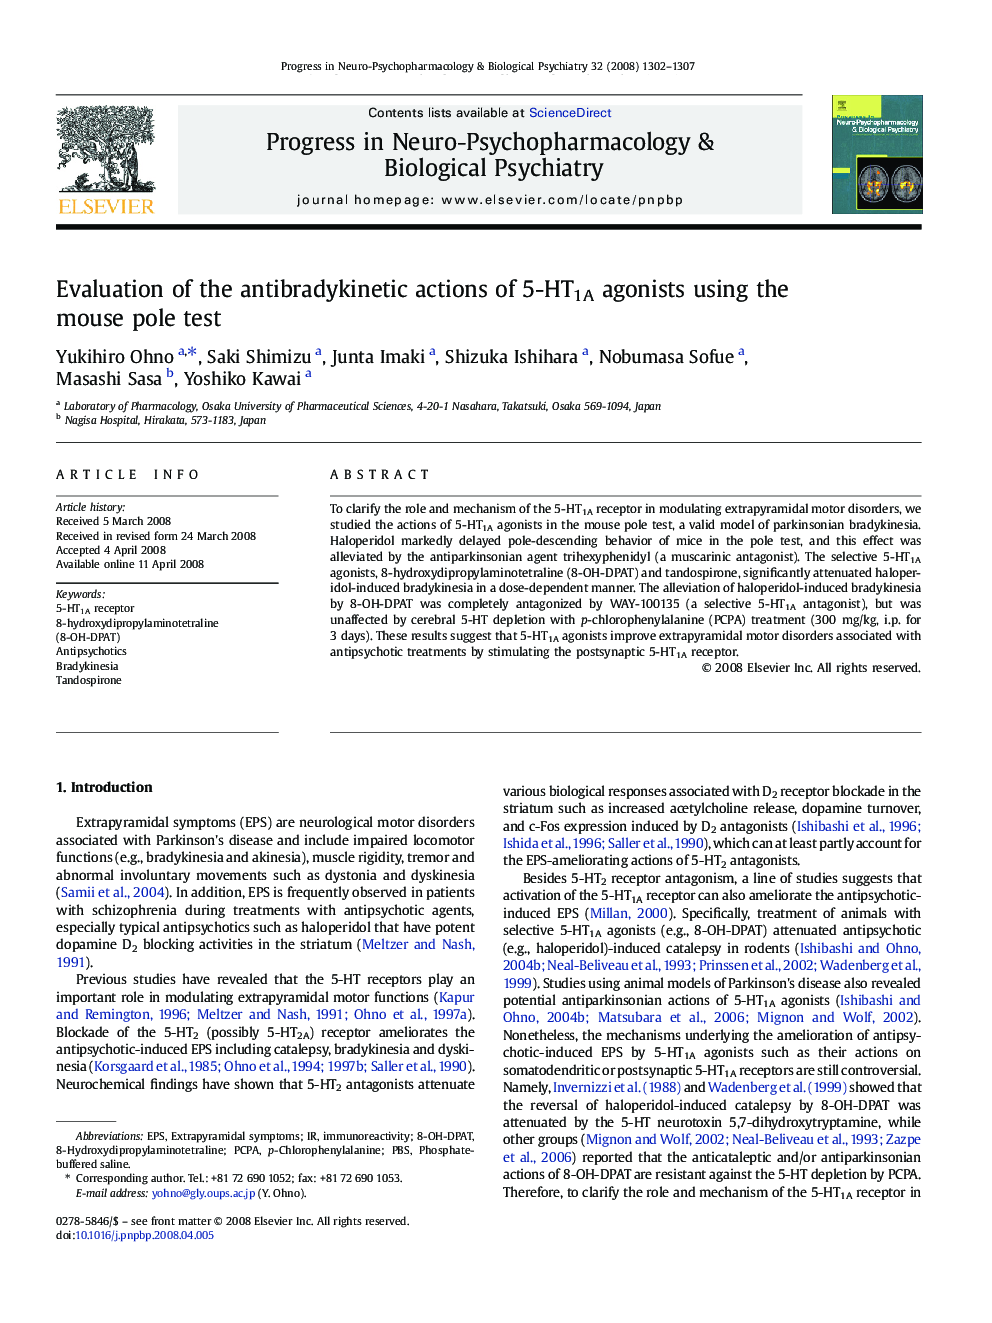 Evaluation of the antibradykinetic actions of 5-HT1A agonists using the mouse pole test